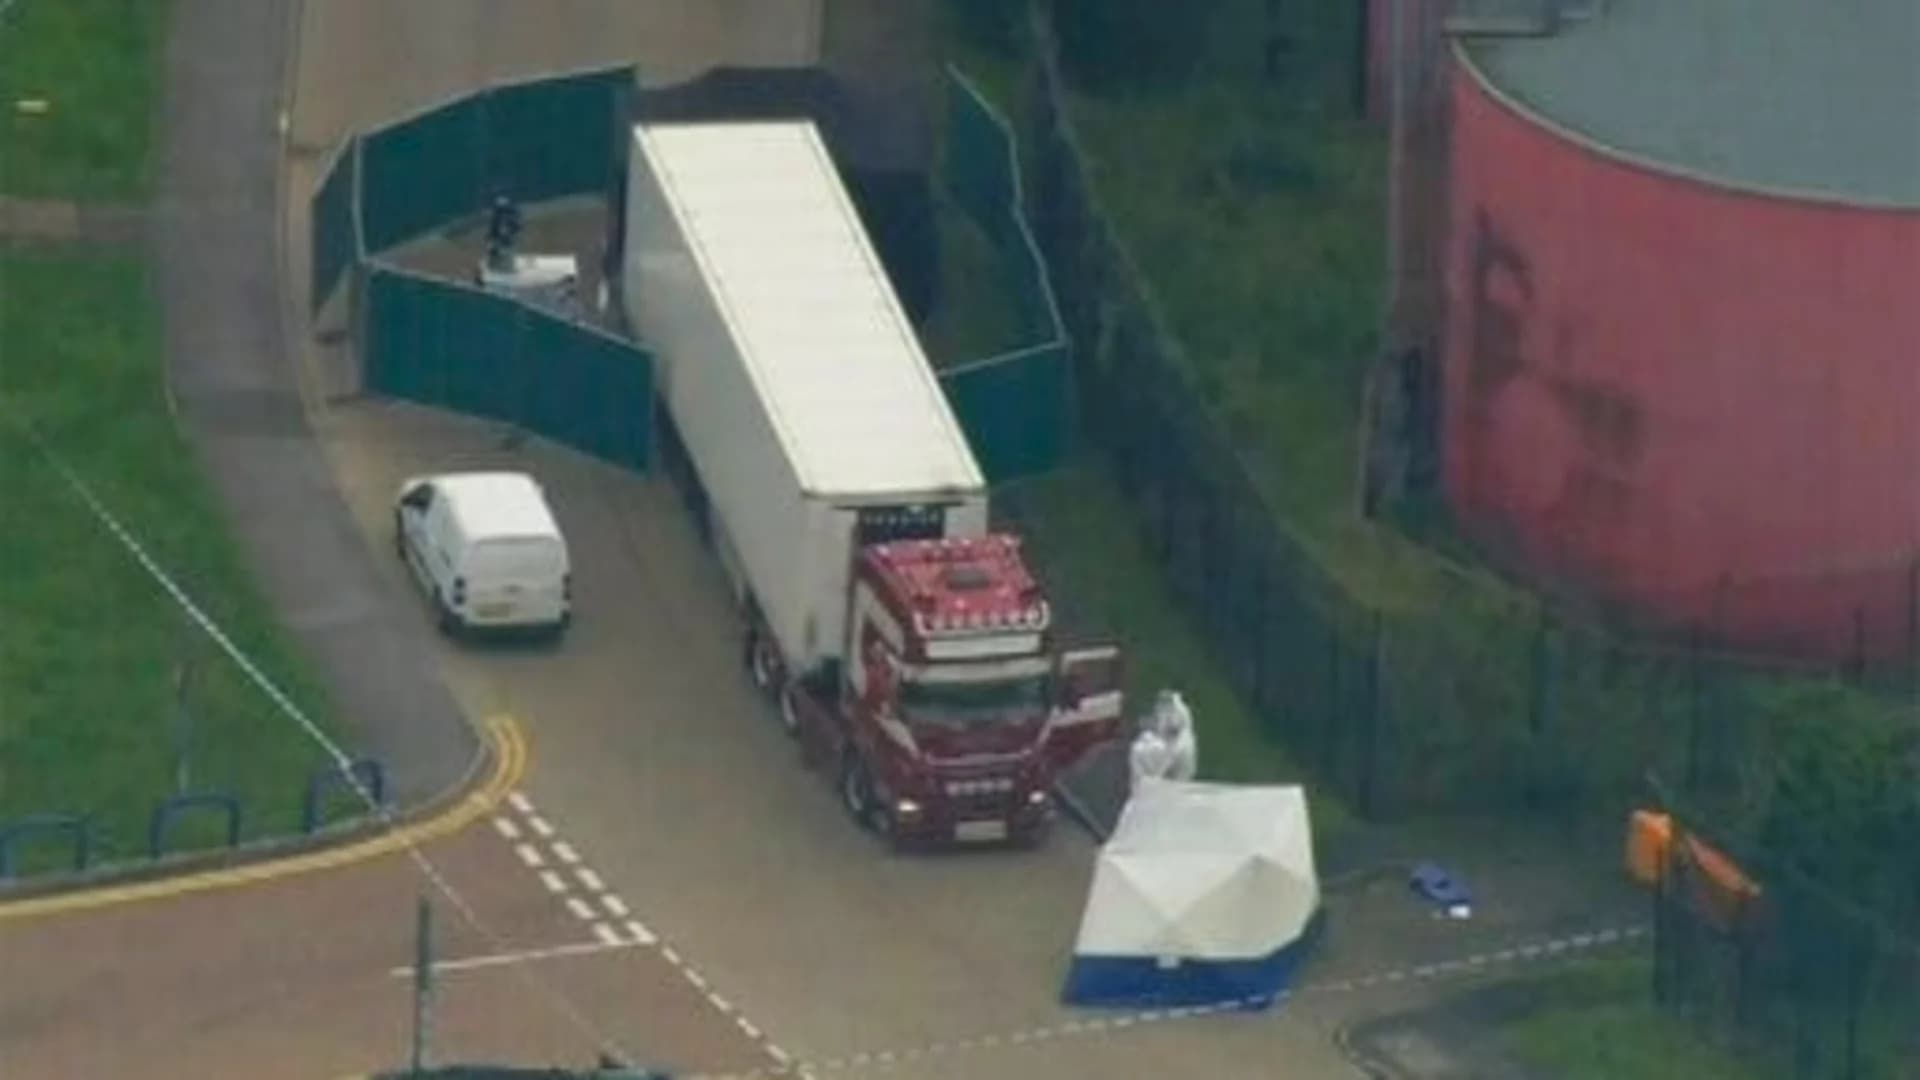 39 people found dead in truck container in southeast England